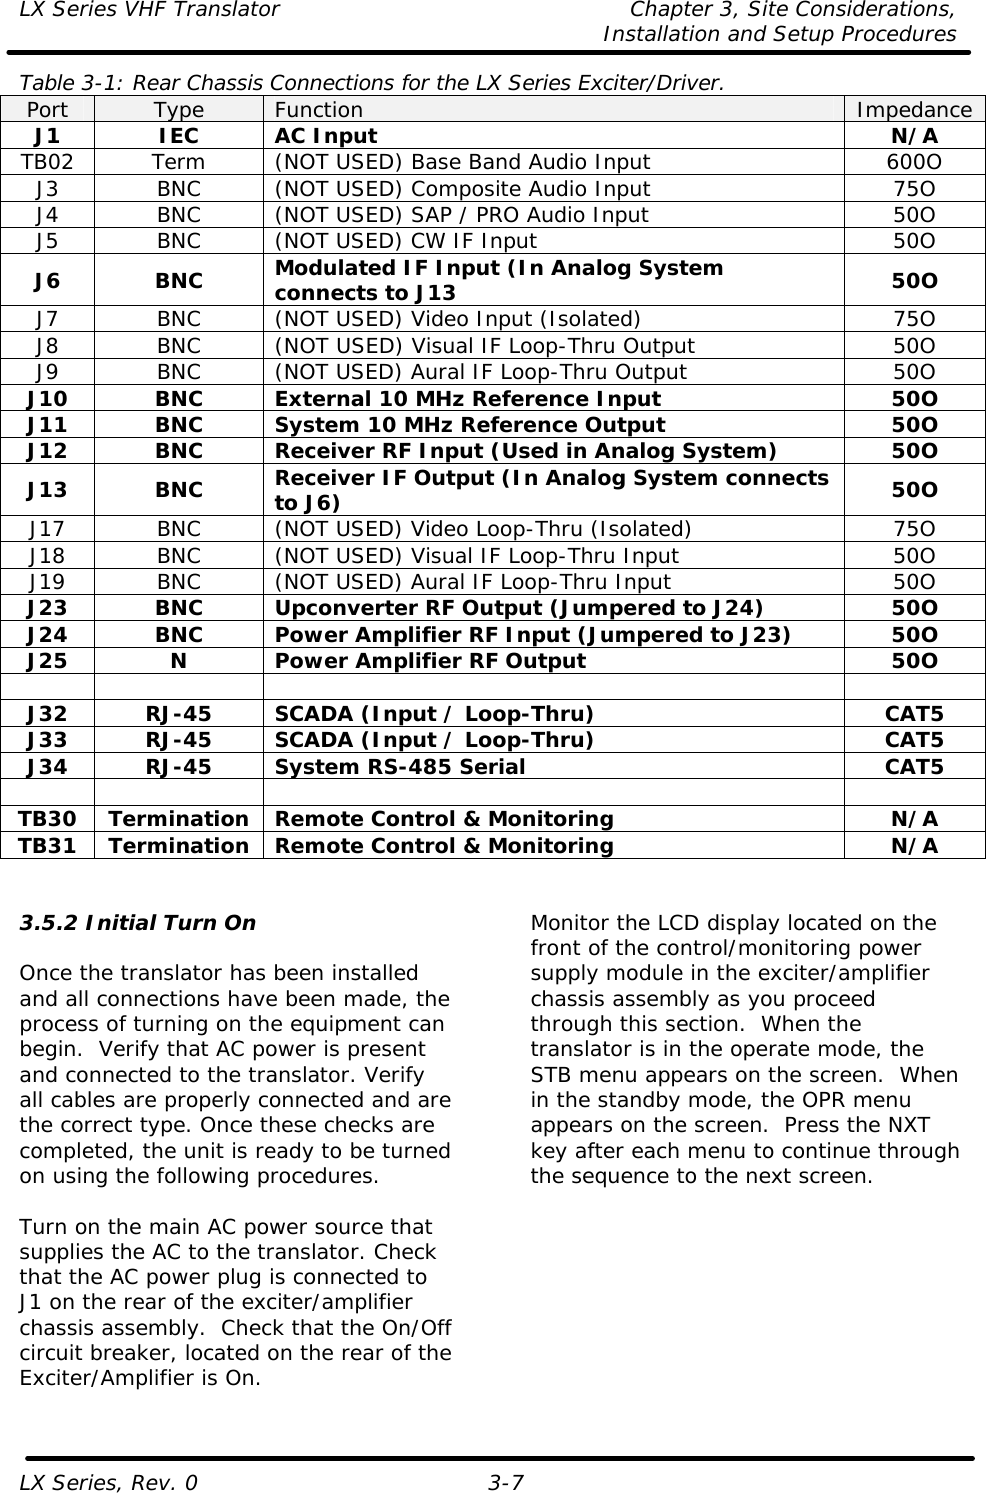 LX Series VHF Translator Chapter 3, Site Considerations,   Installation and Setup Procedures LX Series, Rev. 0 3-7 Table 3-1: Rear Chassis Connections for the LX Series Exciter/Driver. Port Type Function Impedance J1 IEC AC Input N/A TB02 Term (NOT USED) Base Band Audio Input 600O J3 BNC (NOT USED) Composite Audio Input 75O J4 BNC (NOT USED) SAP / PRO Audio Input 50O J5 BNC (NOT USED) CW IF Input 50O J6 BNC Modulated IF Input (In Analog System connects to J13  50O J7 BNC (NOT USED) Video Input (Isolated) 75O J8 BNC (NOT USED) Visual IF Loop-Thru Output 50O J9 BNC (NOT USED) Aural IF Loop-Thru Output 50O J10 BNC External 10 MHz Reference Input 50O J11 BNC System 10 MHz Reference Output 50O J12 BNC Receiver RF Input (Used in Analog System) 50O J13 BNC Receiver IF Output (In Analog System connects to J6) 50O J17 BNC (NOT USED) Video Loop-Thru (Isolated) 75O J18 BNC (NOT USED) Visual IF Loop-Thru Input 50O J19 BNC (NOT USED) Aural IF Loop-Thru Input 50O J23 BNC Upconverter RF Output (Jumpered to J24) 50O J24 BNC Power Amplifier RF Input (Jumpered to J23) 50O J25 N Power Amplifier RF Output 50O        J32 RJ-45 SCADA (Input / Loop-Thru) CAT5 J33 RJ-45 SCADA (Input / Loop-Thru) CAT5 J34 RJ-45 System RS-485 Serial CAT5        TB30 Termination Remote Control &amp; Monitoring N/A TB31 Termination Remote Control &amp; Monitoring N/A   3.5.2 Initial Turn On  Once the translator has been installed and all connections have been made, the process of turning on the equipment can begin.  Verify that AC power is present and connected to the translator. Verify all cables are properly connected and are the correct type. Once these checks are completed, the unit is ready to be turned on using the following procedures.  Turn on the main AC power source that supplies the AC to the translator. Check that the AC power plug is connected to J1 on the rear of the exciter/amplifier chassis assembly.  Check that the On/Off circuit breaker, located on the rear of the Exciter/Amplifier is On.  Monitor the LCD display located on the front of the control/monitoring power supply module in the exciter/amplifier chassis assembly as you proceed through this section.  When the translator is in the operate mode, the STB menu appears on the screen.  When in the standby mode, the OPR menu appears on the screen.  Press the NXT key after each menu to continue through the sequence to the next screen.  